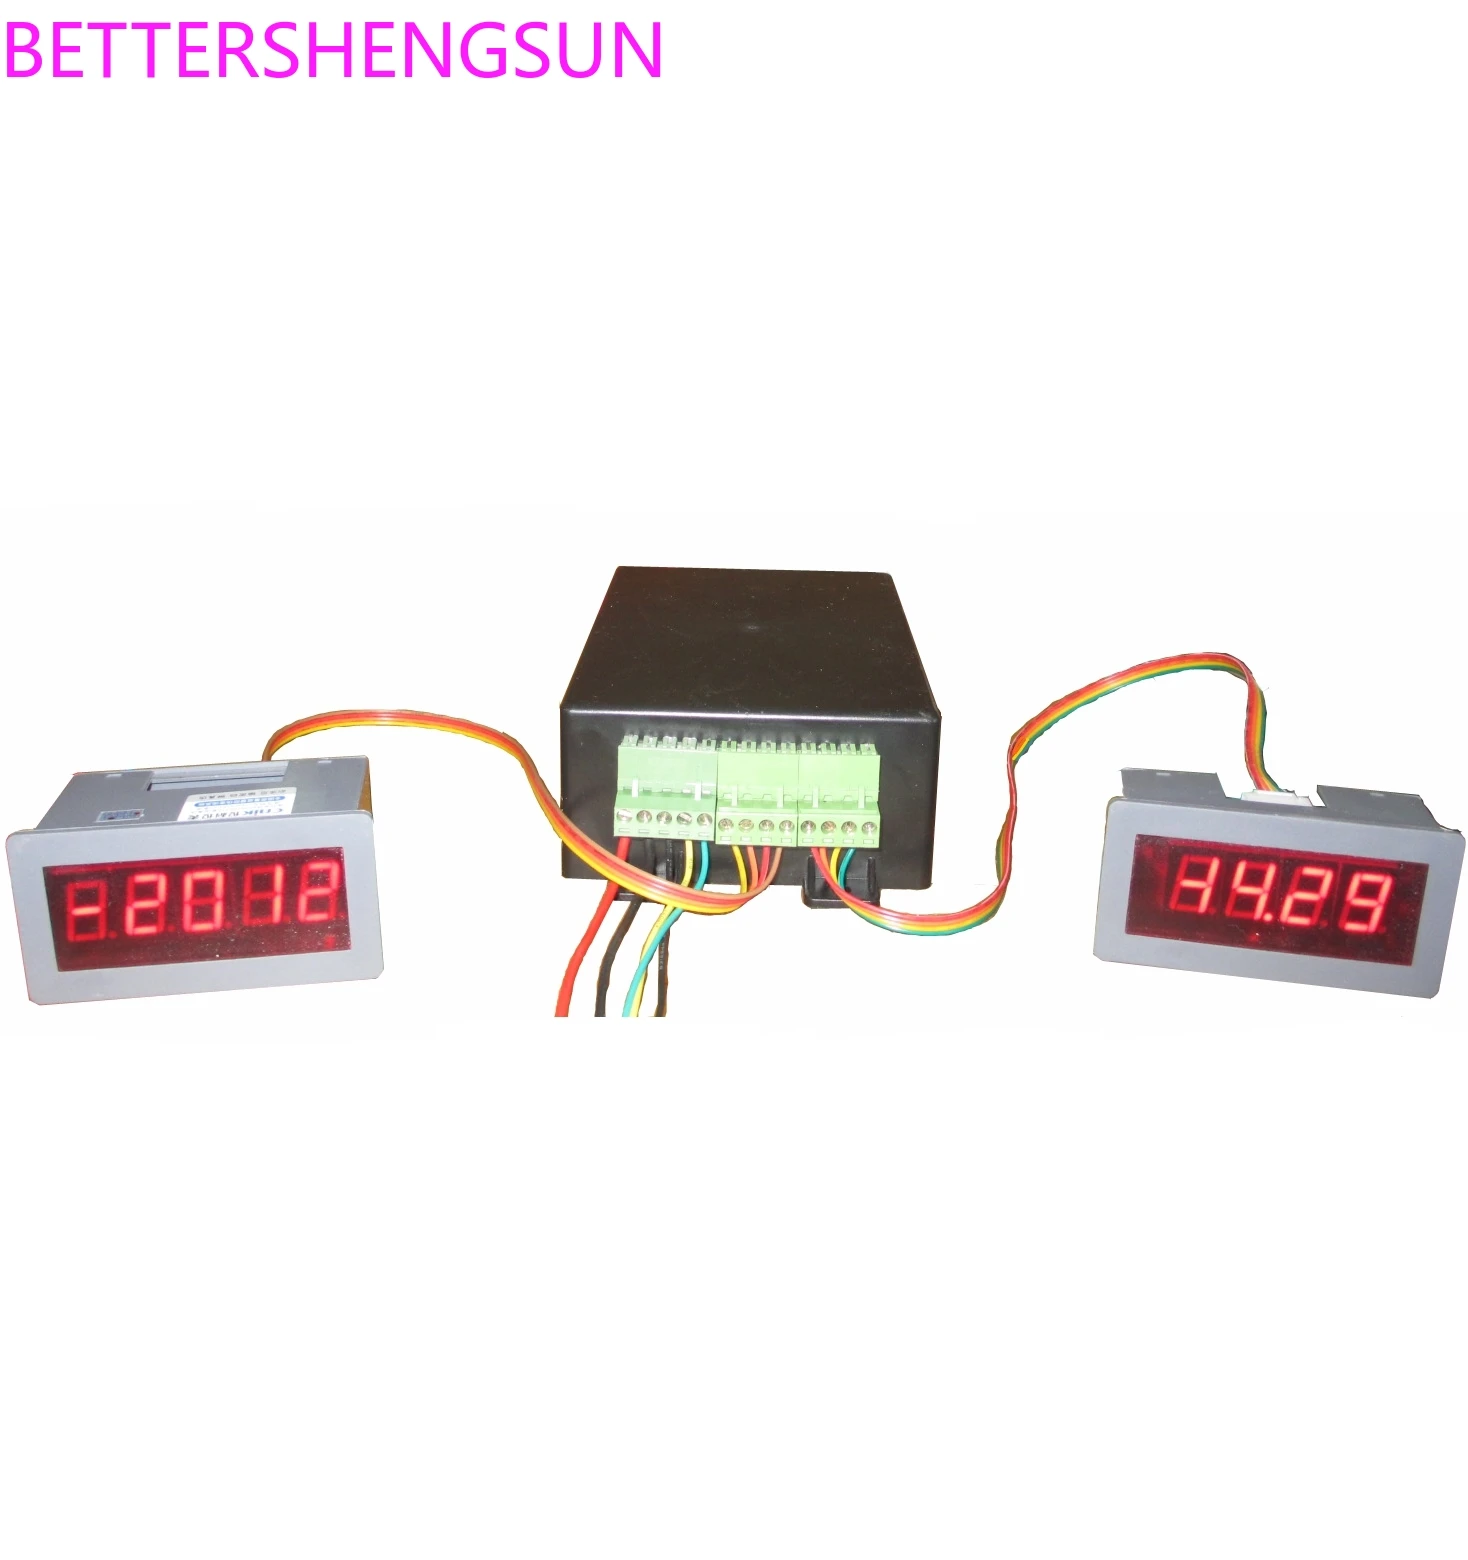 

Customized DC24V input DC-3KV 1mA DC high voltage power supply module Voltage and current display module type